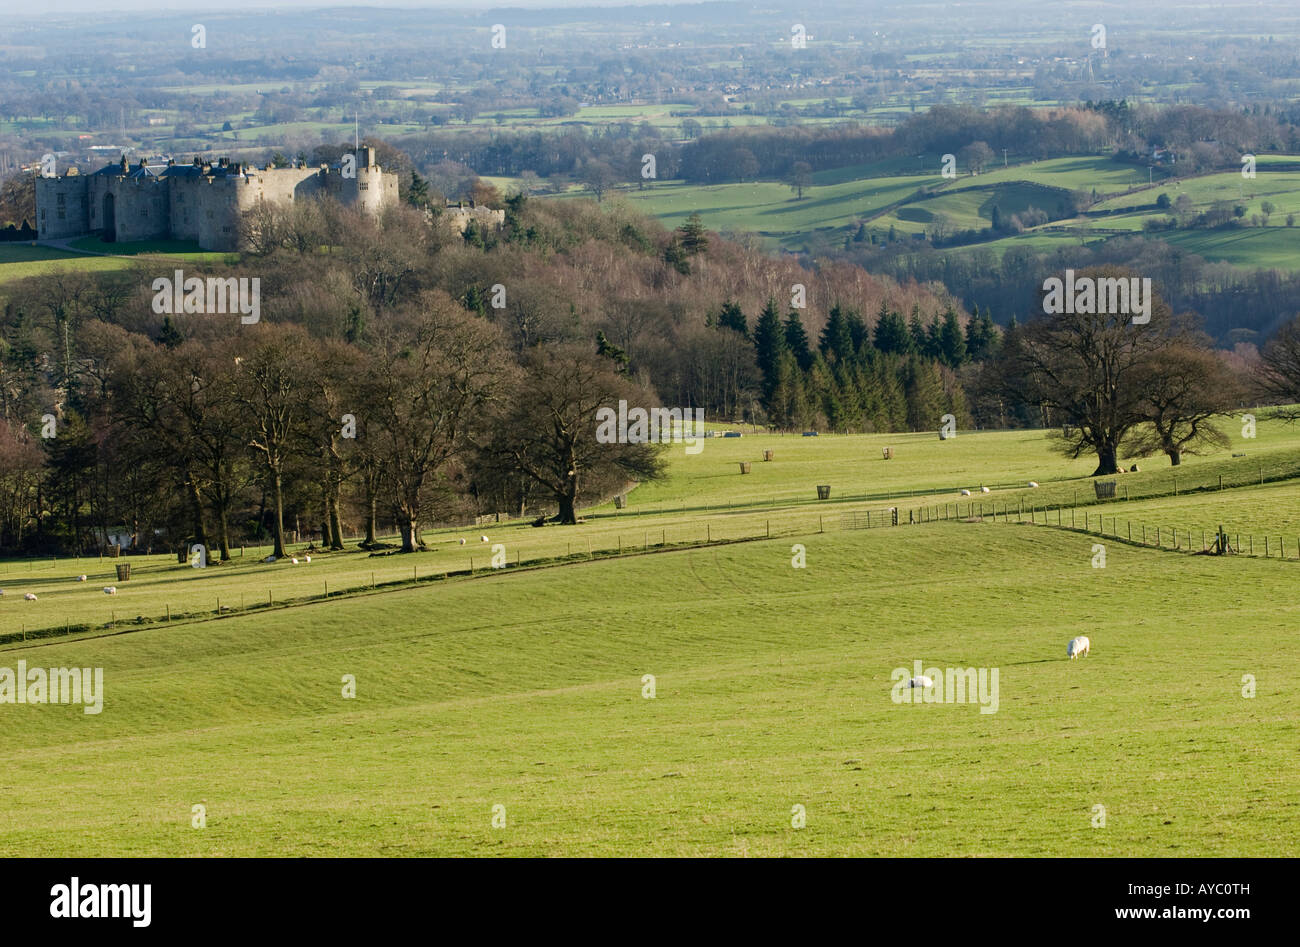 Wales, Wrexham, Chirk. Chirk Castle, a Marcher fortress built for Edward I in the 1300s, guards the entrance to the Glyn Ceiriog Valley, historically an important route into the heart of Wales. Stock Photo